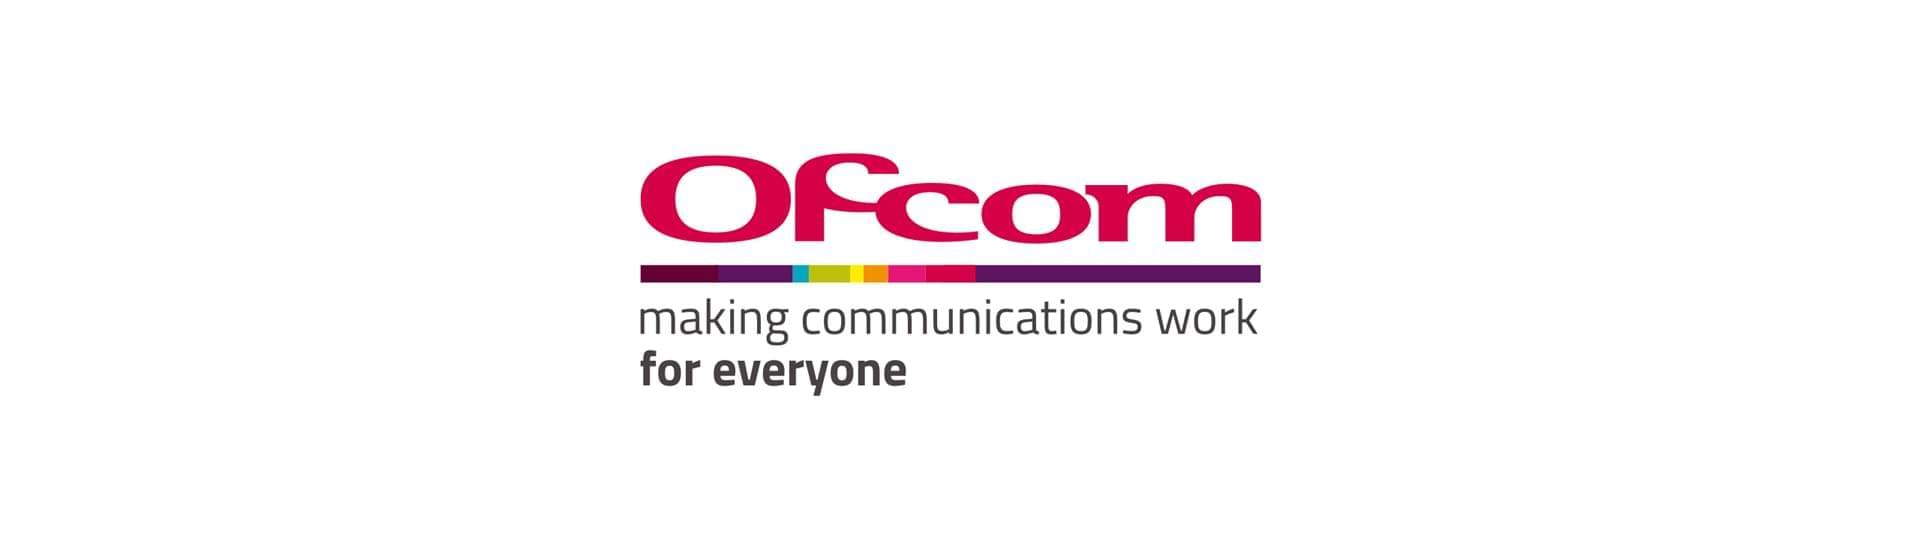 Ofcom making communications work for everyone